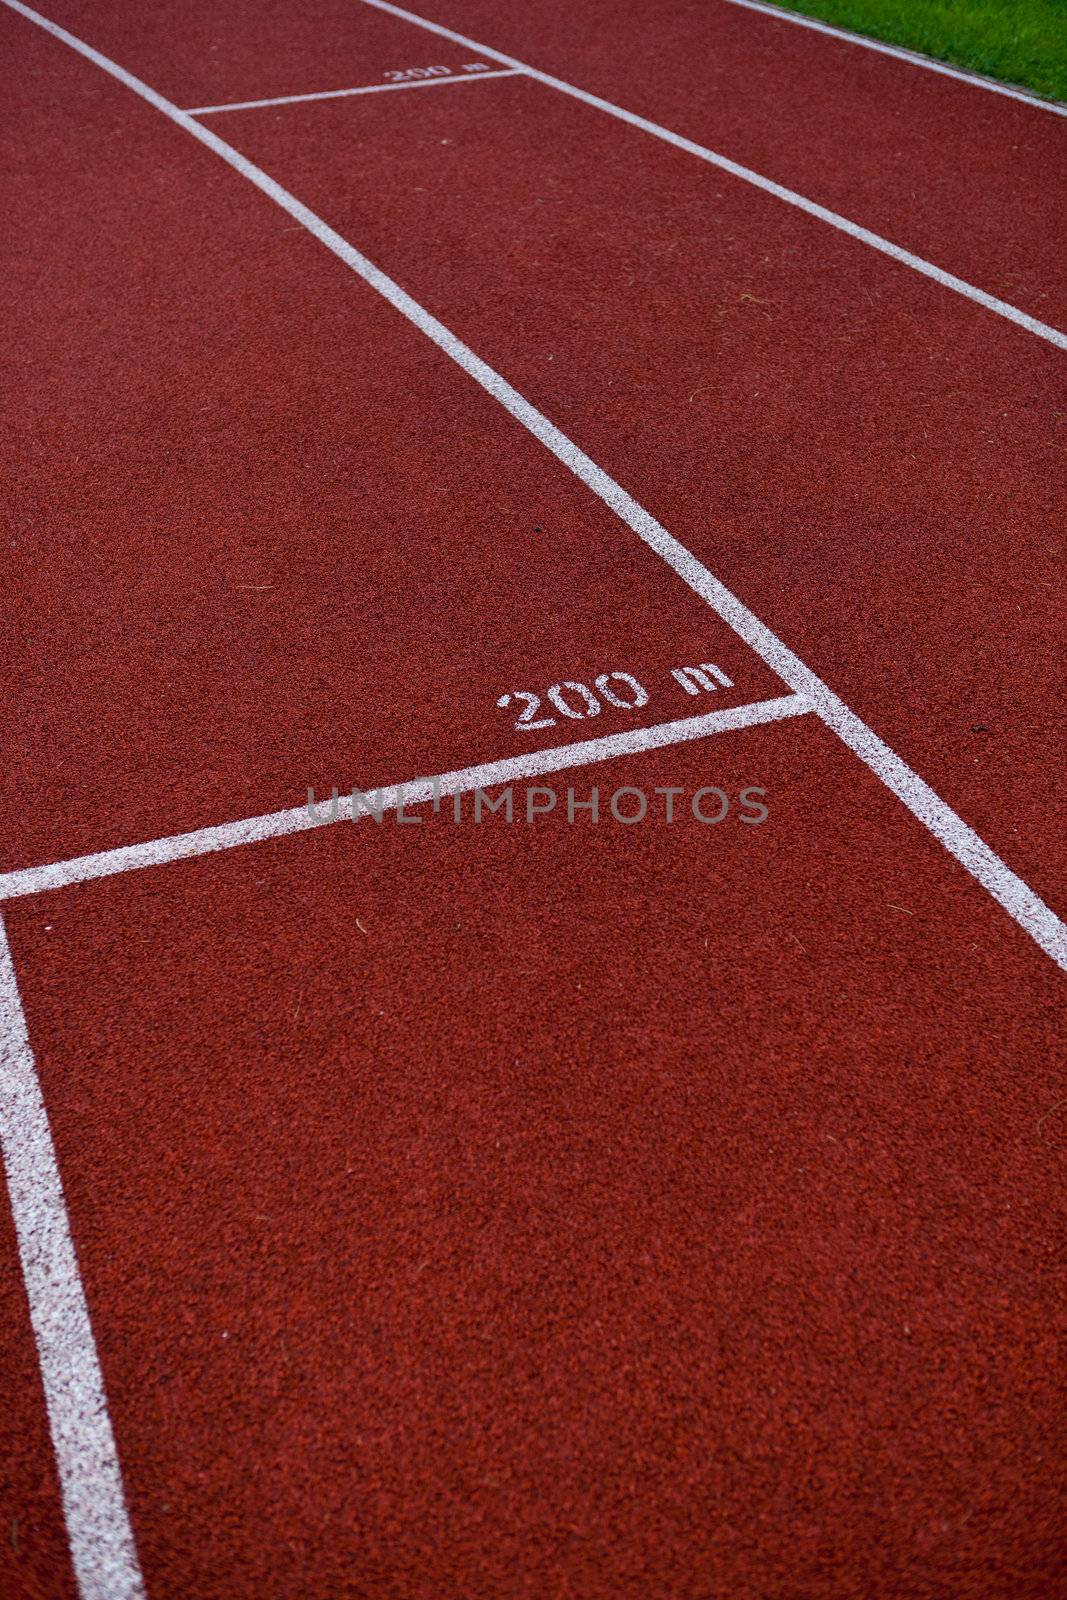 Sport grounds concept - Athletics Track Lane Numbers  by viktor_cap